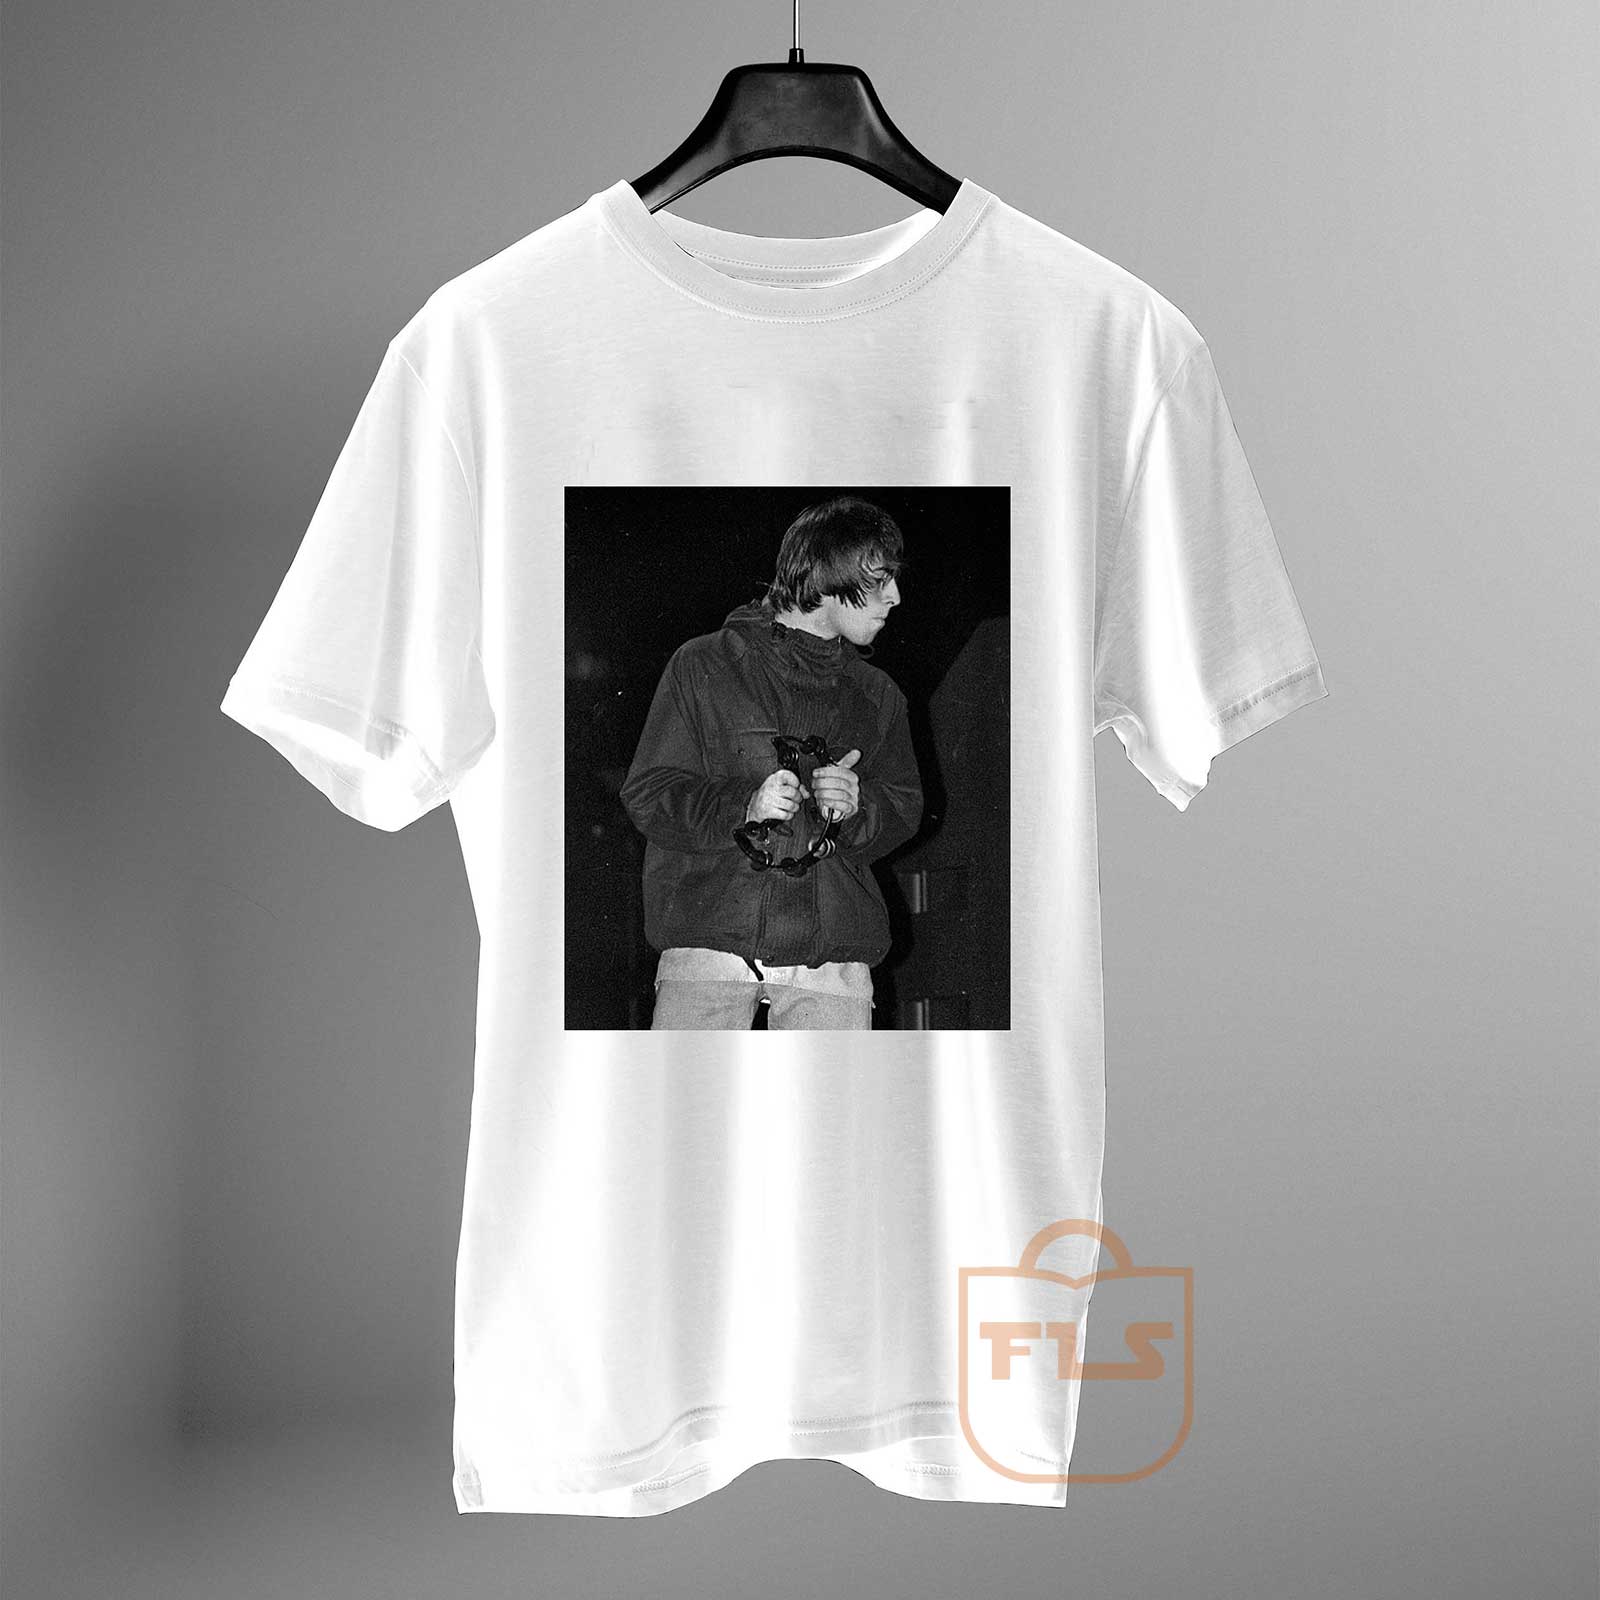 T-Shirt Homme Large Liam Gallagher Music mon Artwork from Oasis Unisexe Femme UK 